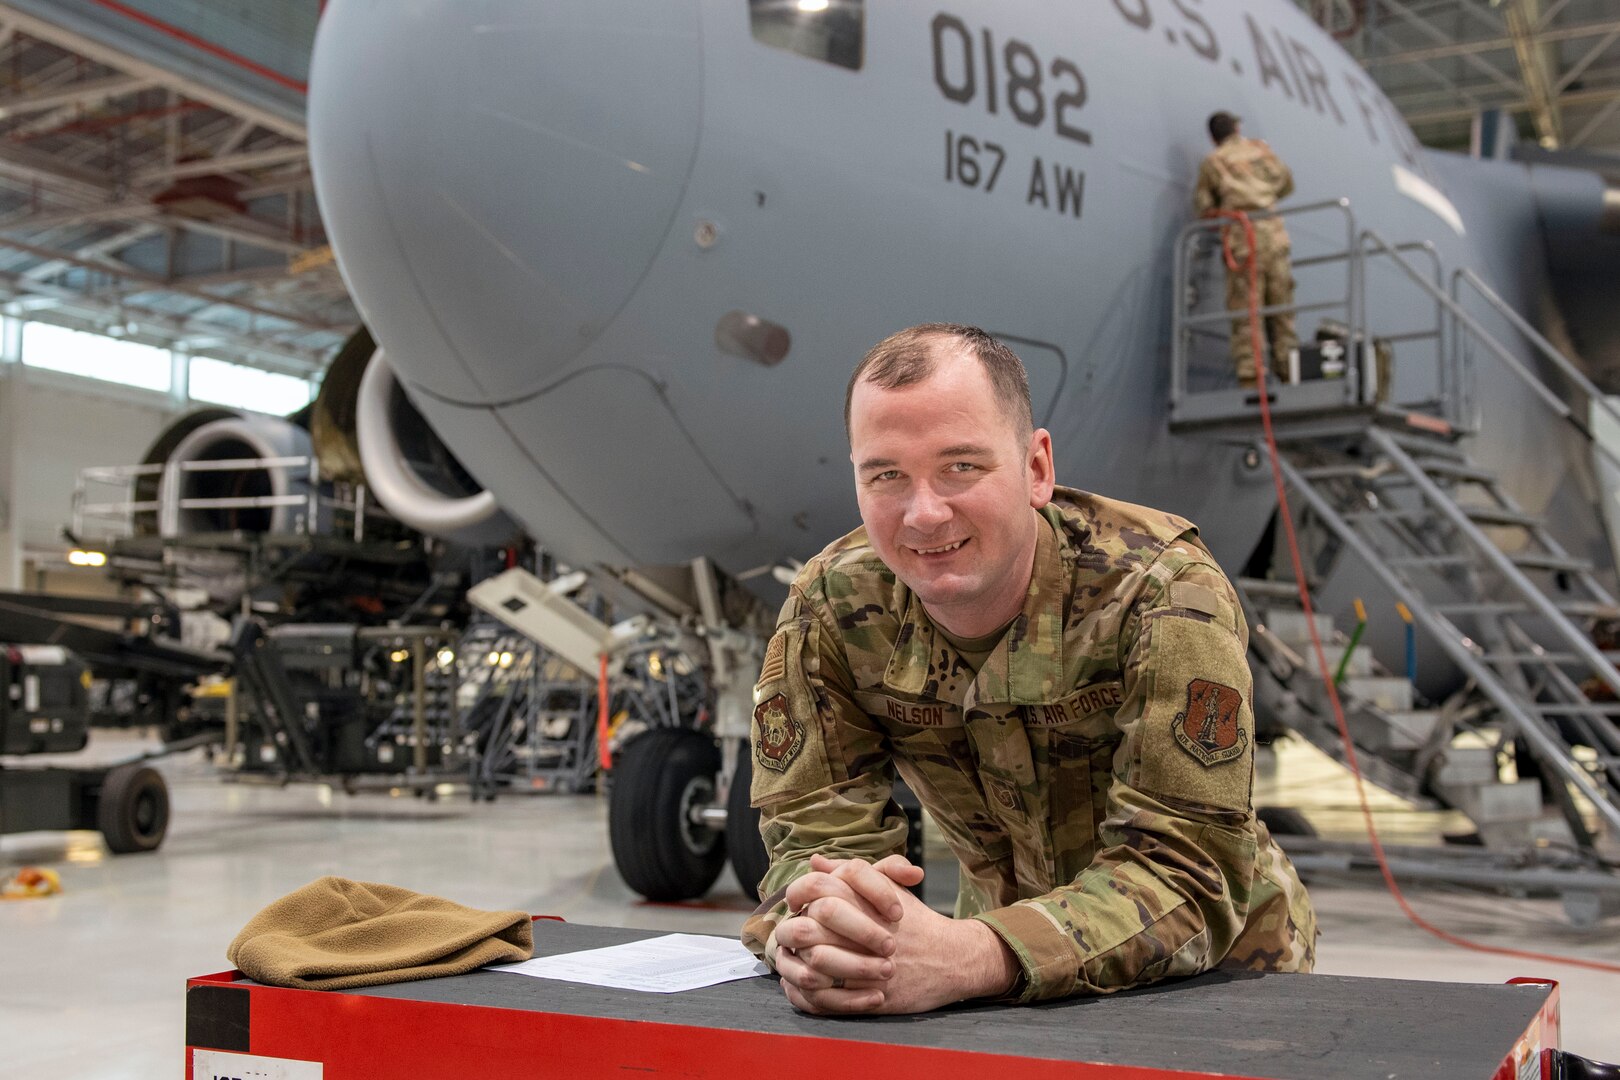 U.S. Air Force Tech. Sgt. Jacob Nelson is a crew chief for the 167th Aircraft Maintenance Squadron and the 167th Airlift Wing Airman Spotlight for January 2022